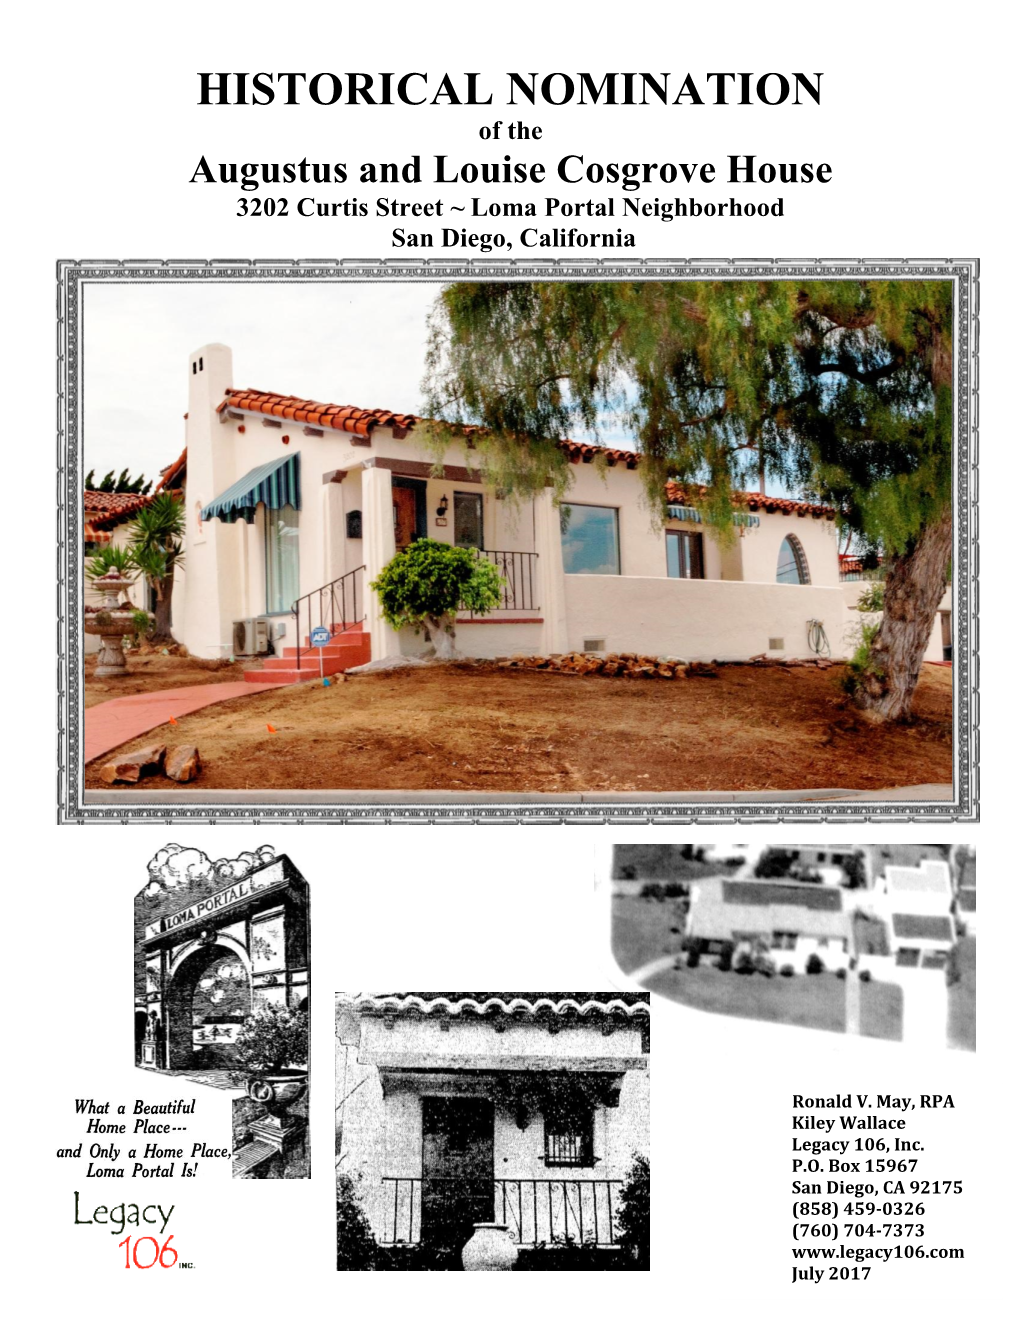 HISTORICAL NOMINATION of the Augustus and Louise Cosgrove House 3202 Curtis Street ~ Loma Portal Neighborhood San Diego, California